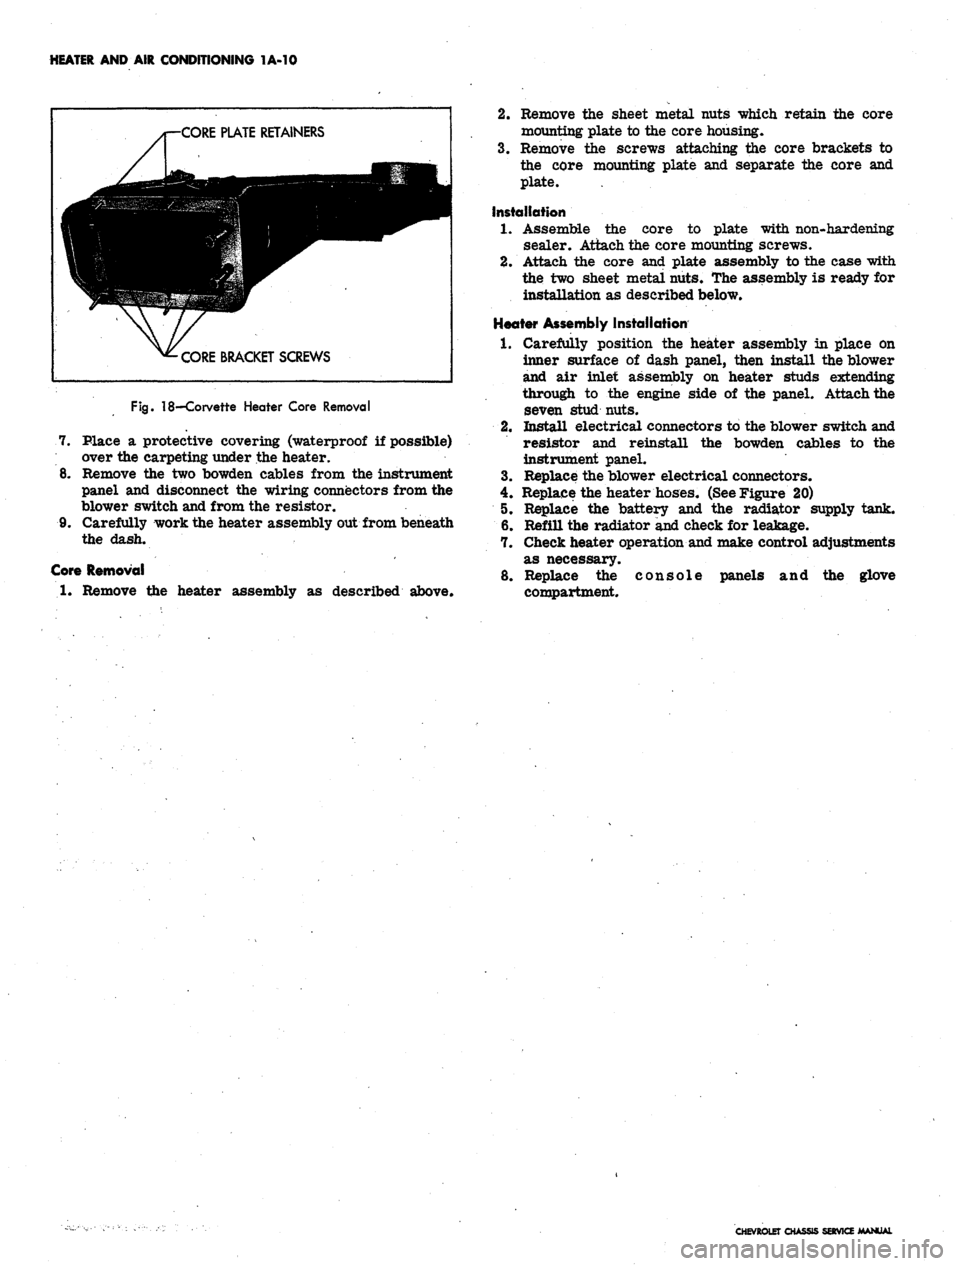 CHEVROLET CAMARO 1967 1.G Chassis User Guide 
HEATER AND AIR CONDITIONING 1A-10

PLATE RETAINERS

CORE BRACKET SCREWS

Fig.
 18—Corvette Heater Core Removal

7. Place a protective covering (waterproof if possible)

over the carpeting under the